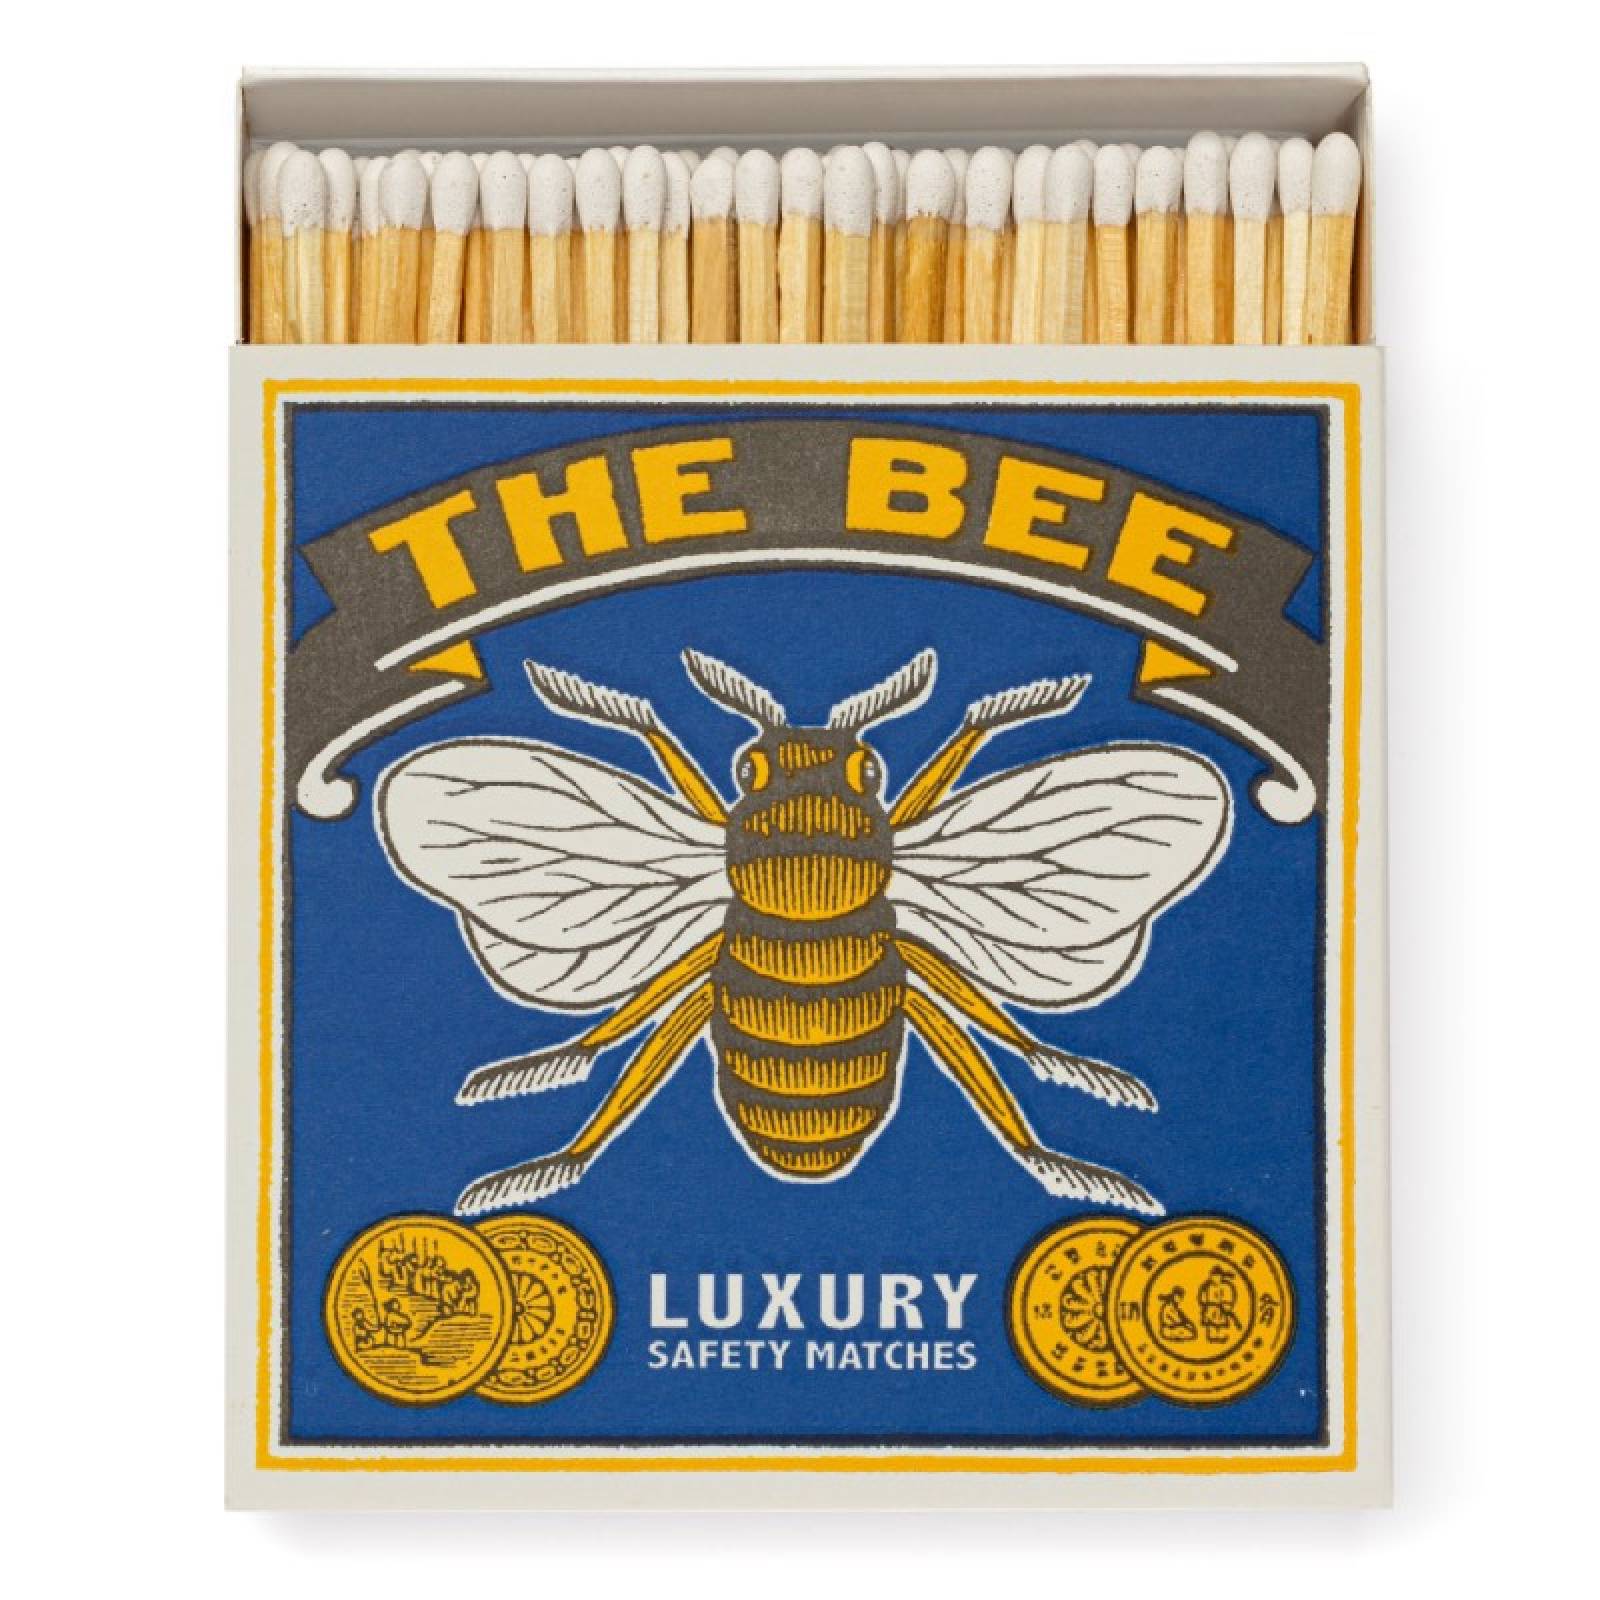 The Bee - Square Box Of Safety Matches thumbnails